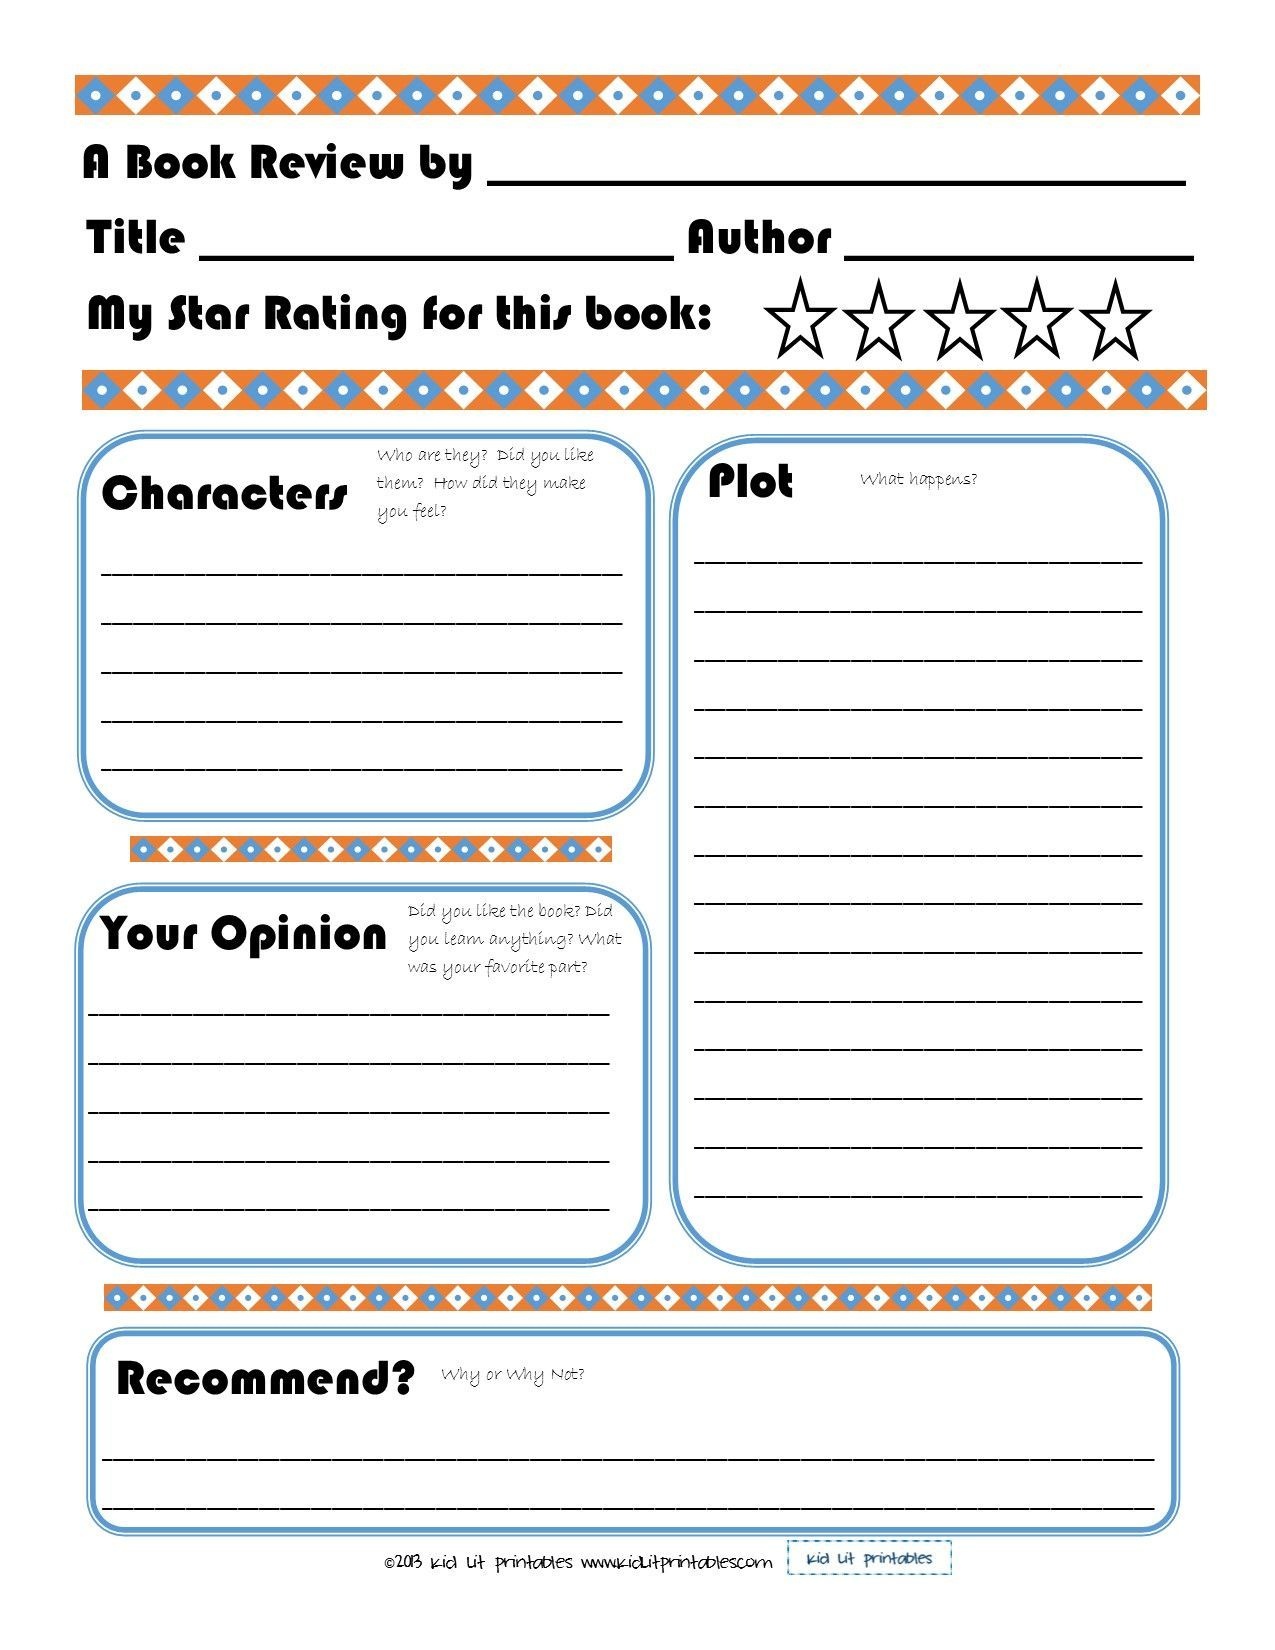 Free Printable Book Report Forms | Teaching Ideas | Book Review - Free Printable Book Report Forms